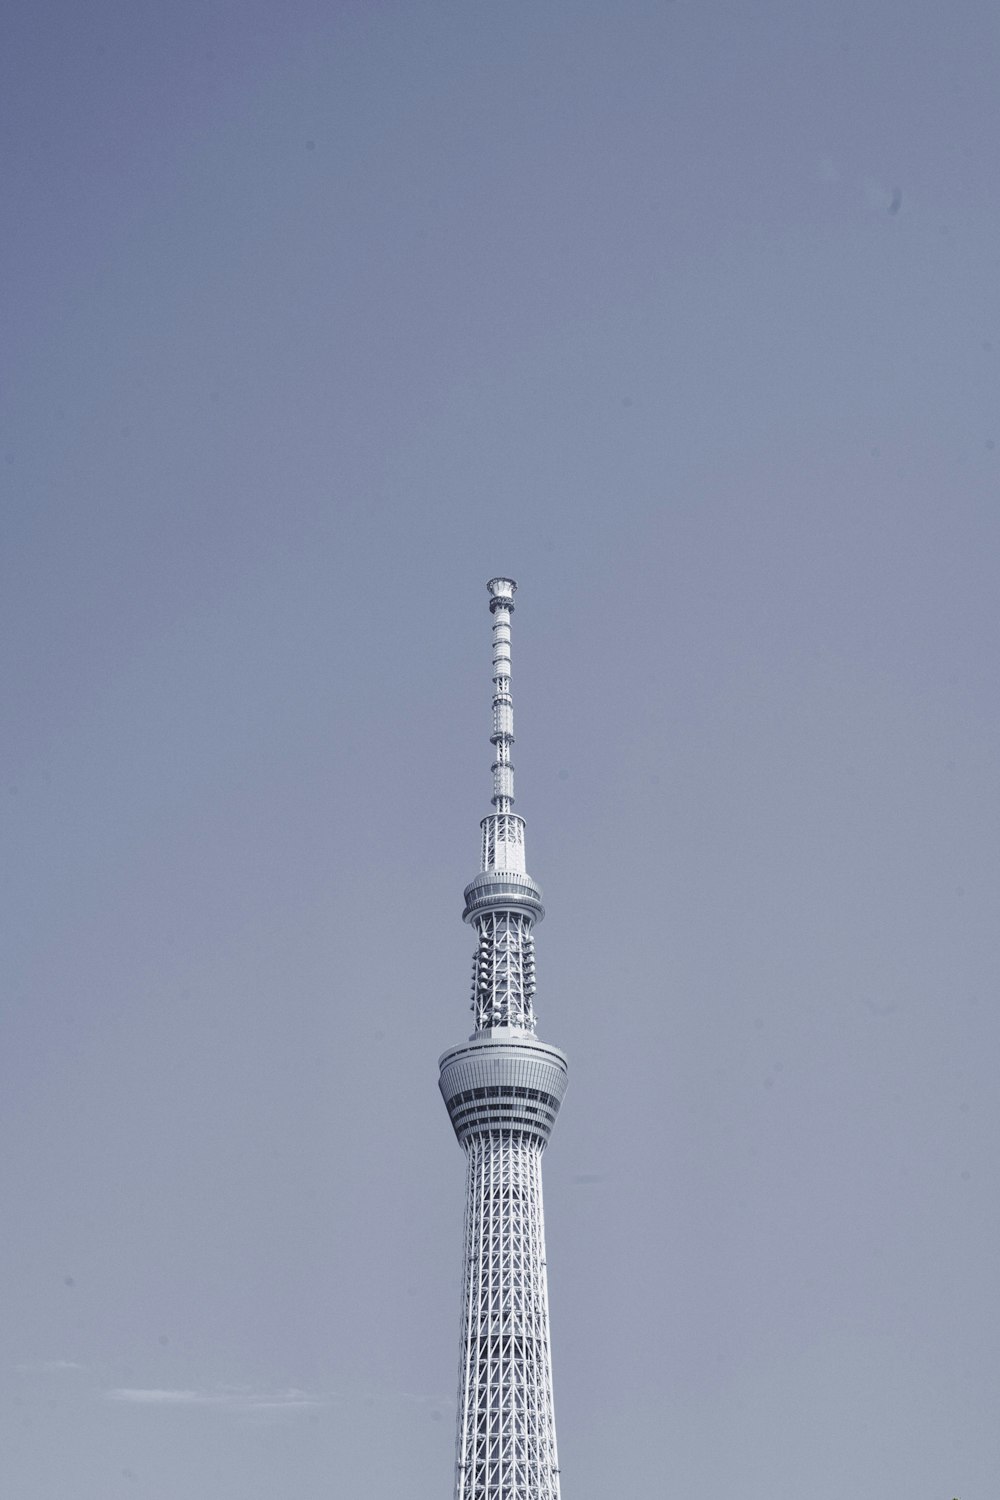 a very tall tower with a clock on it's side